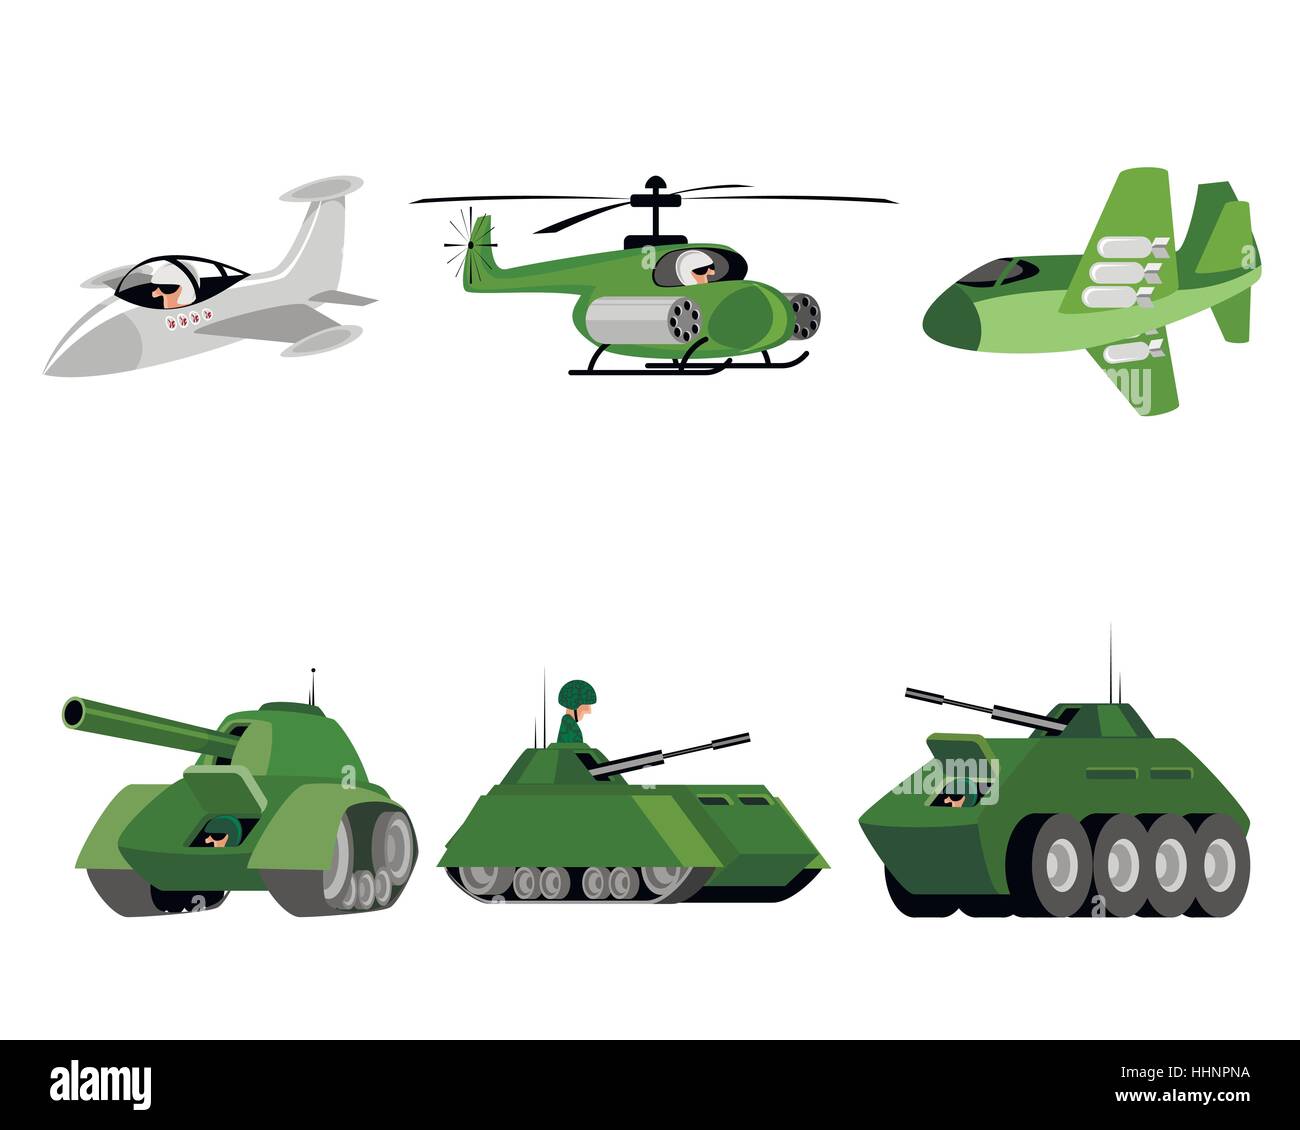 Vector illustration of a six military vehicle Stock Vector